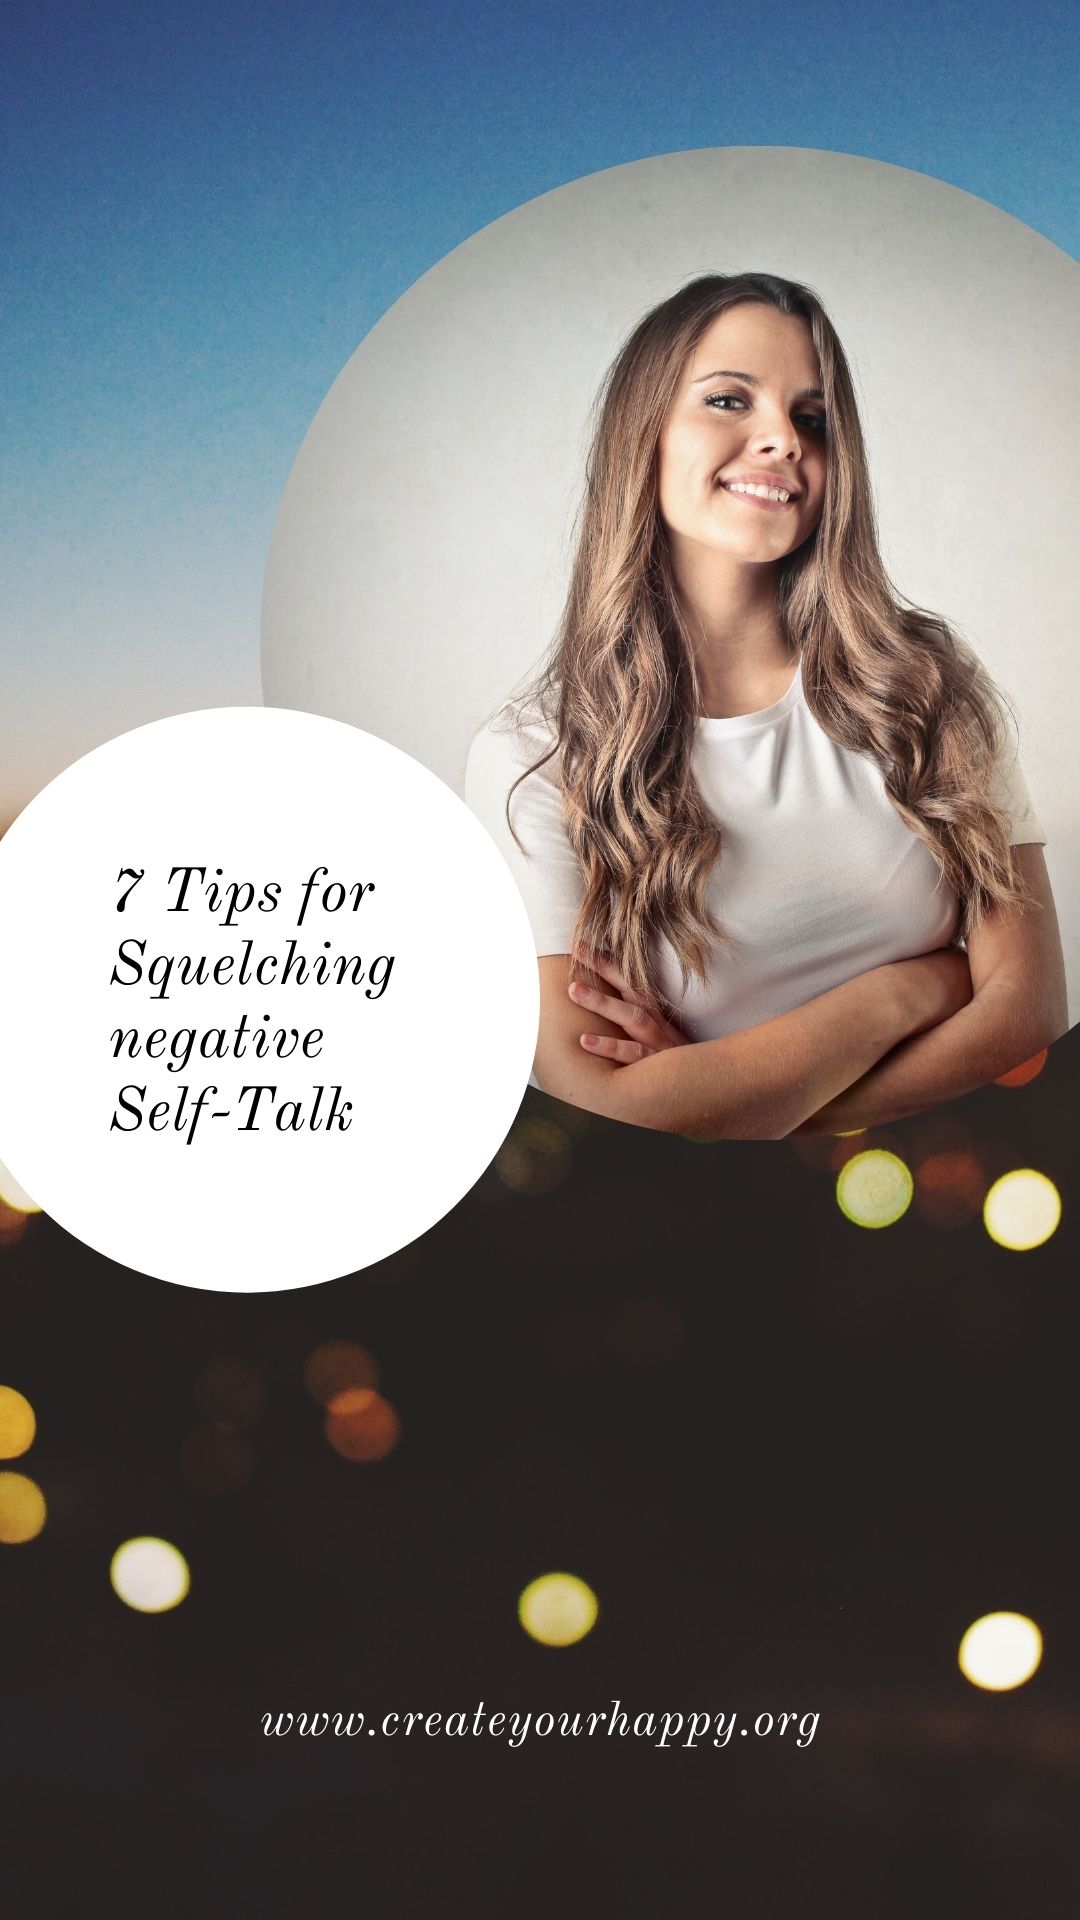 7 Tips for Squelching Negative Self-Talk